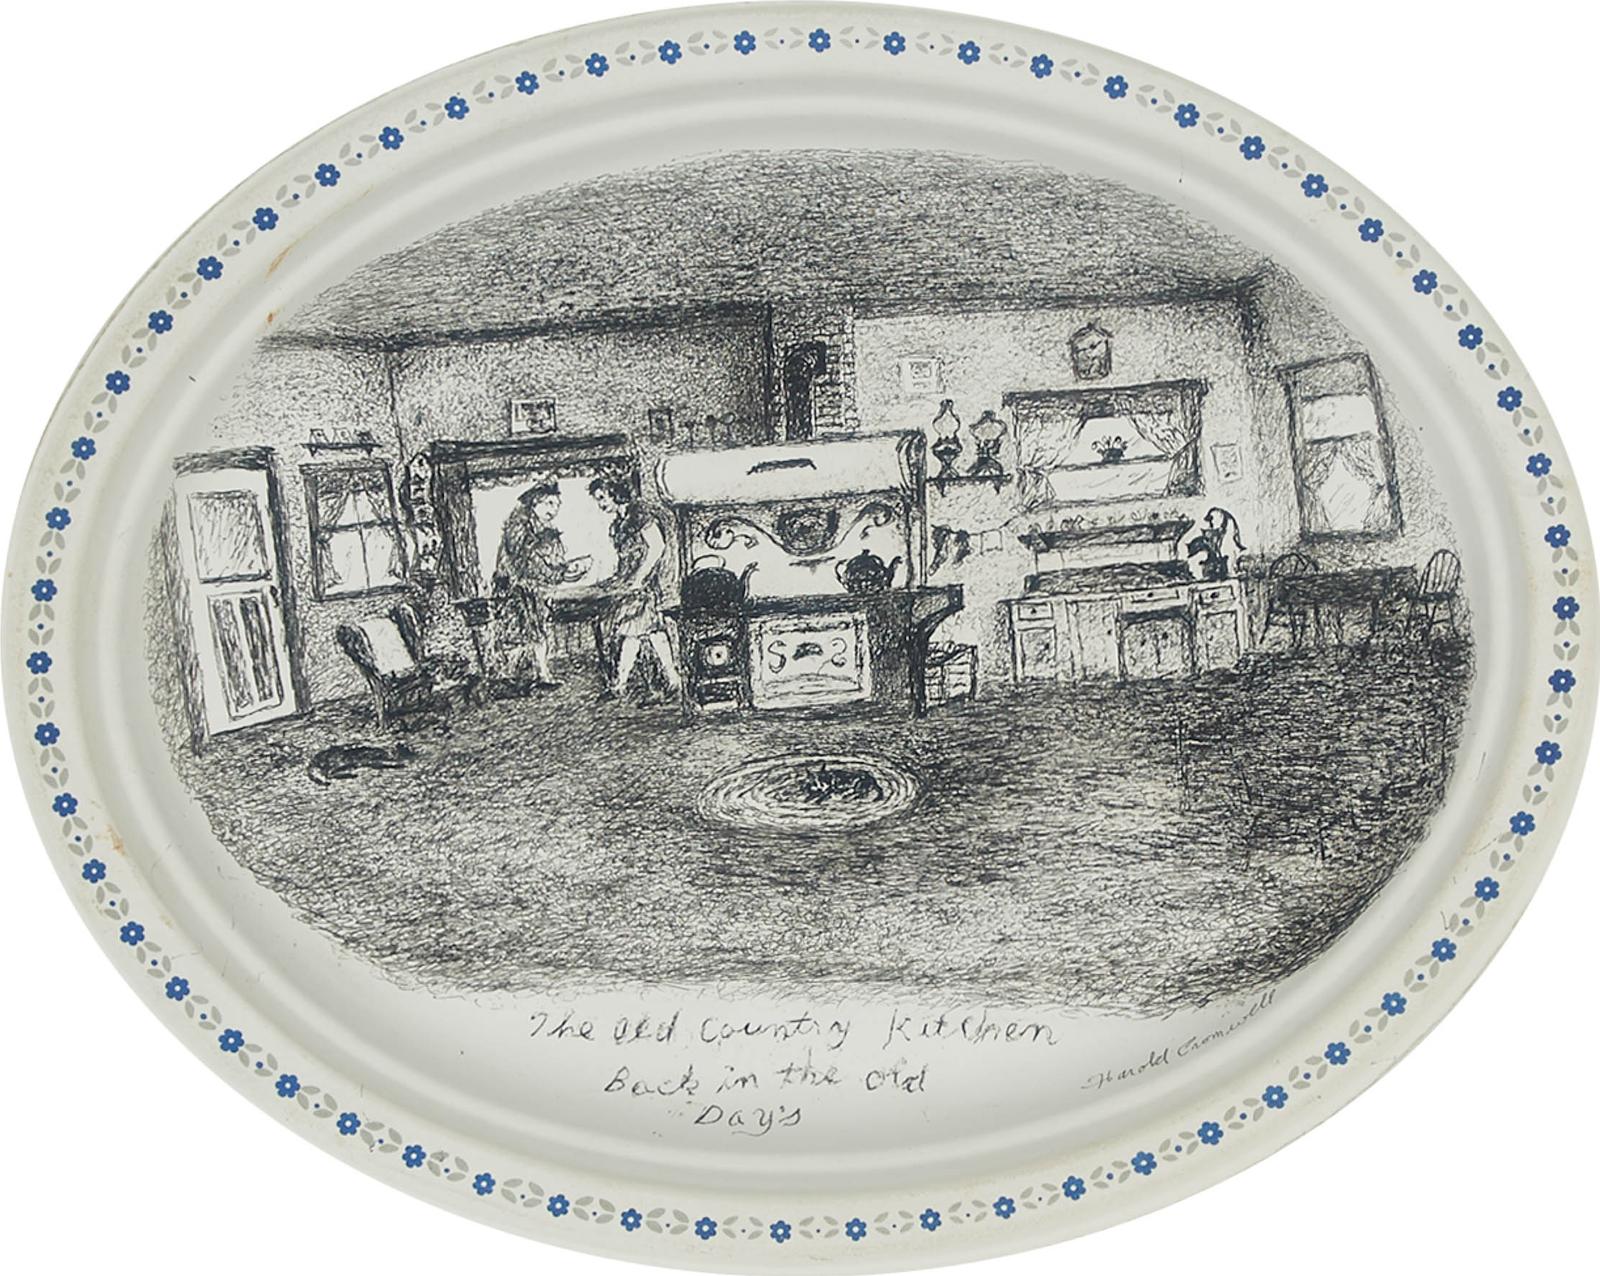 Harold Cromwell (1919-2008) - The Old Country Kitchen Back In The Old Days